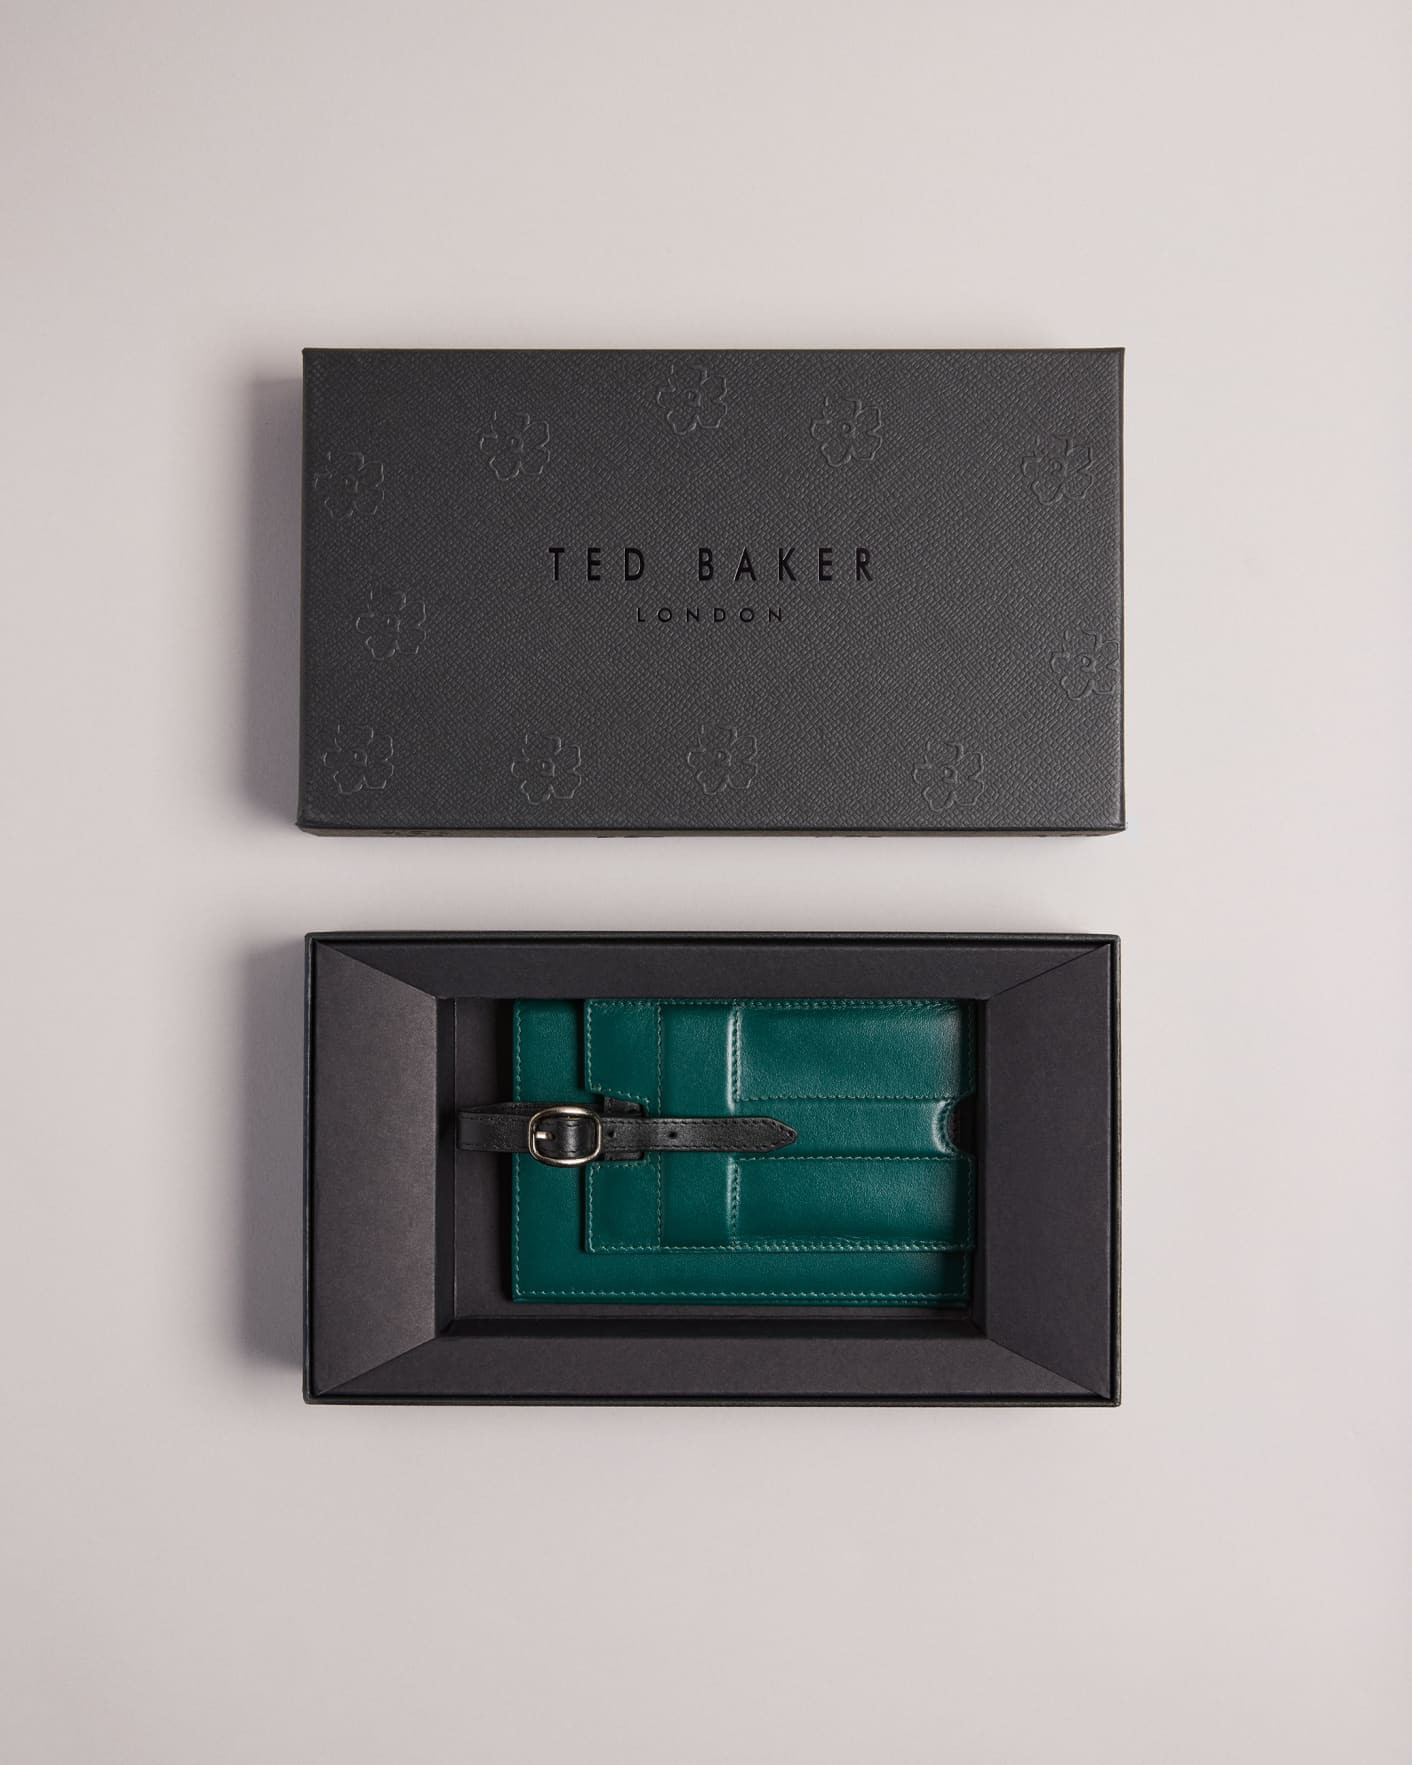 TED BAKER PASSPORT HOLDER & LUGGAGE TAG SET - ANSAM / DK-GREEN - ONE SIZE / 263612